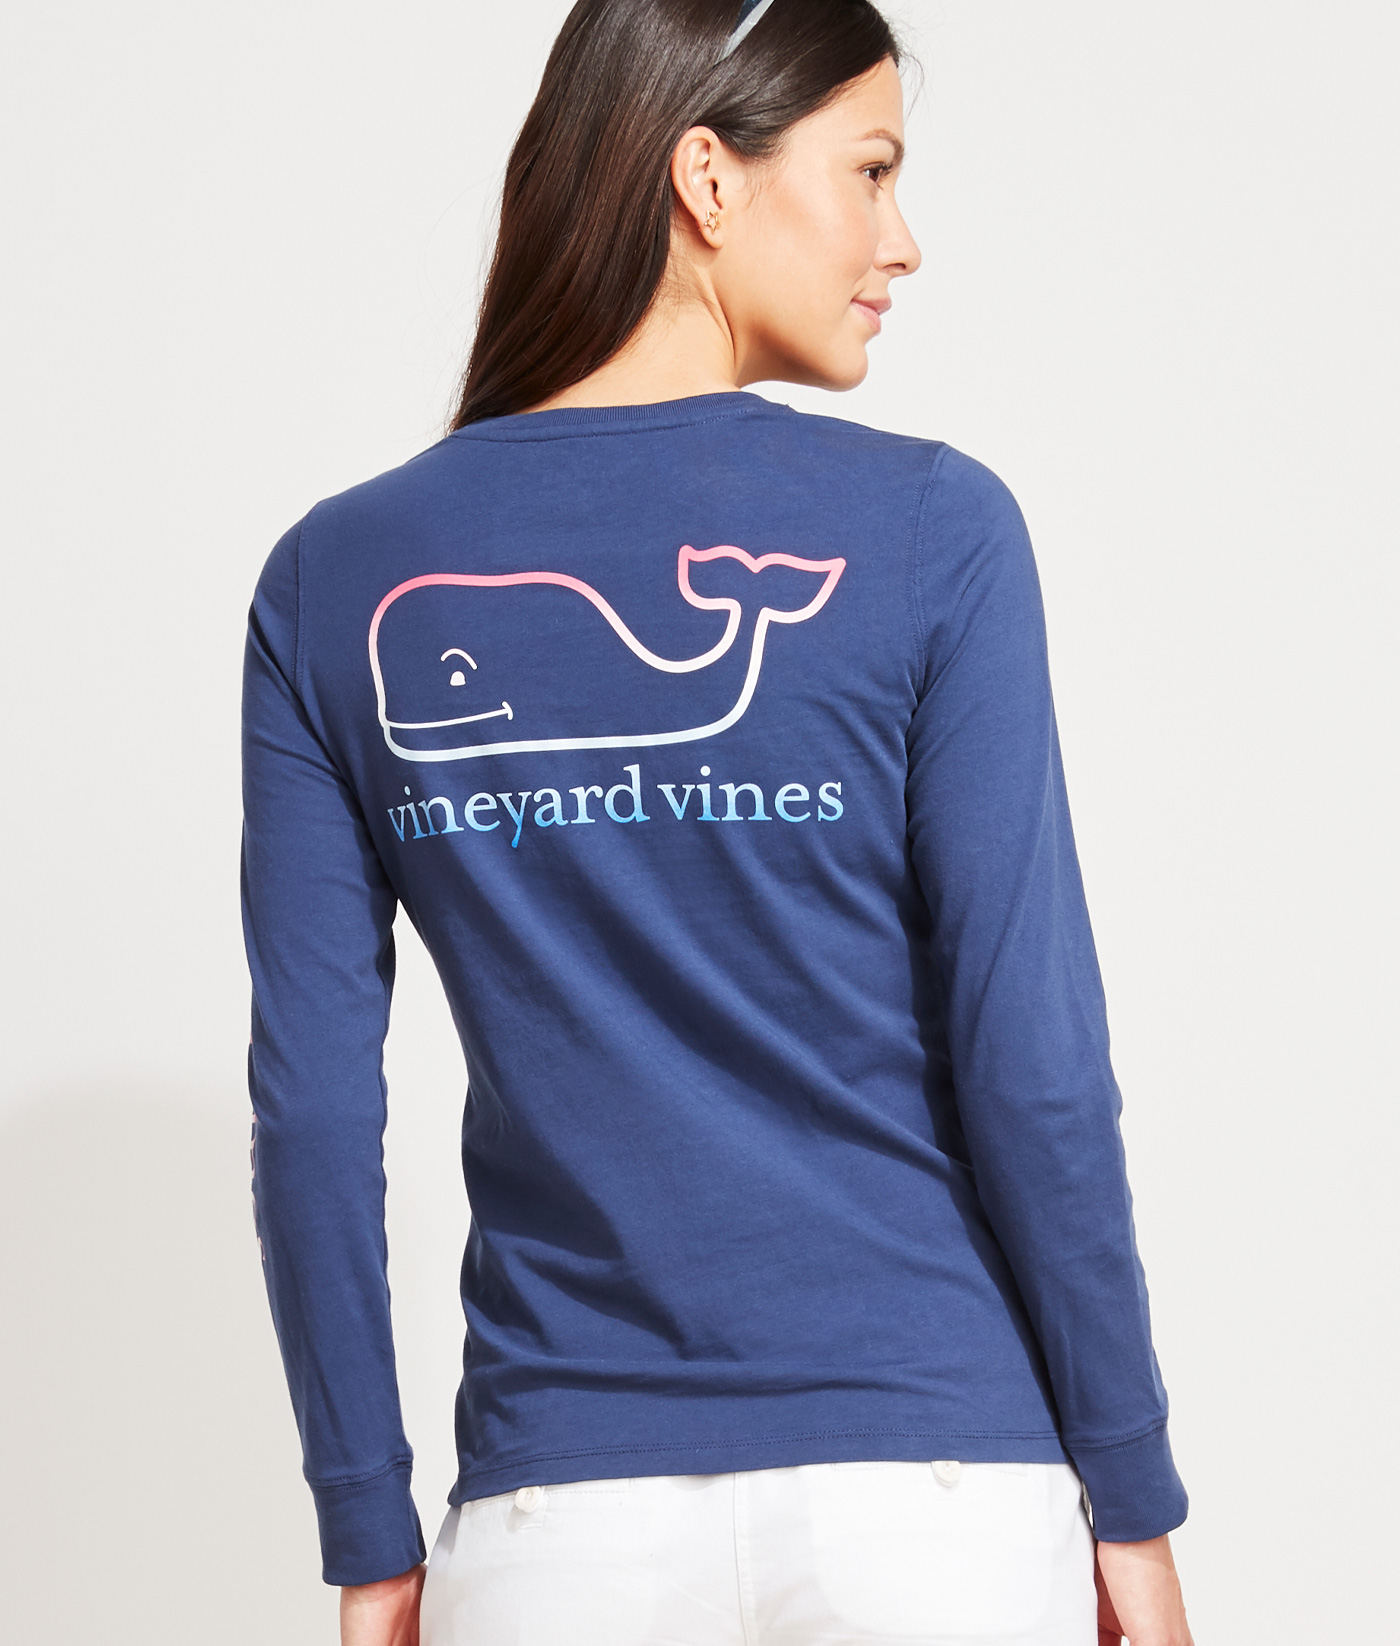 Shop Long-Sleeve Ombre Whale Pocket Tee at vineyard vines